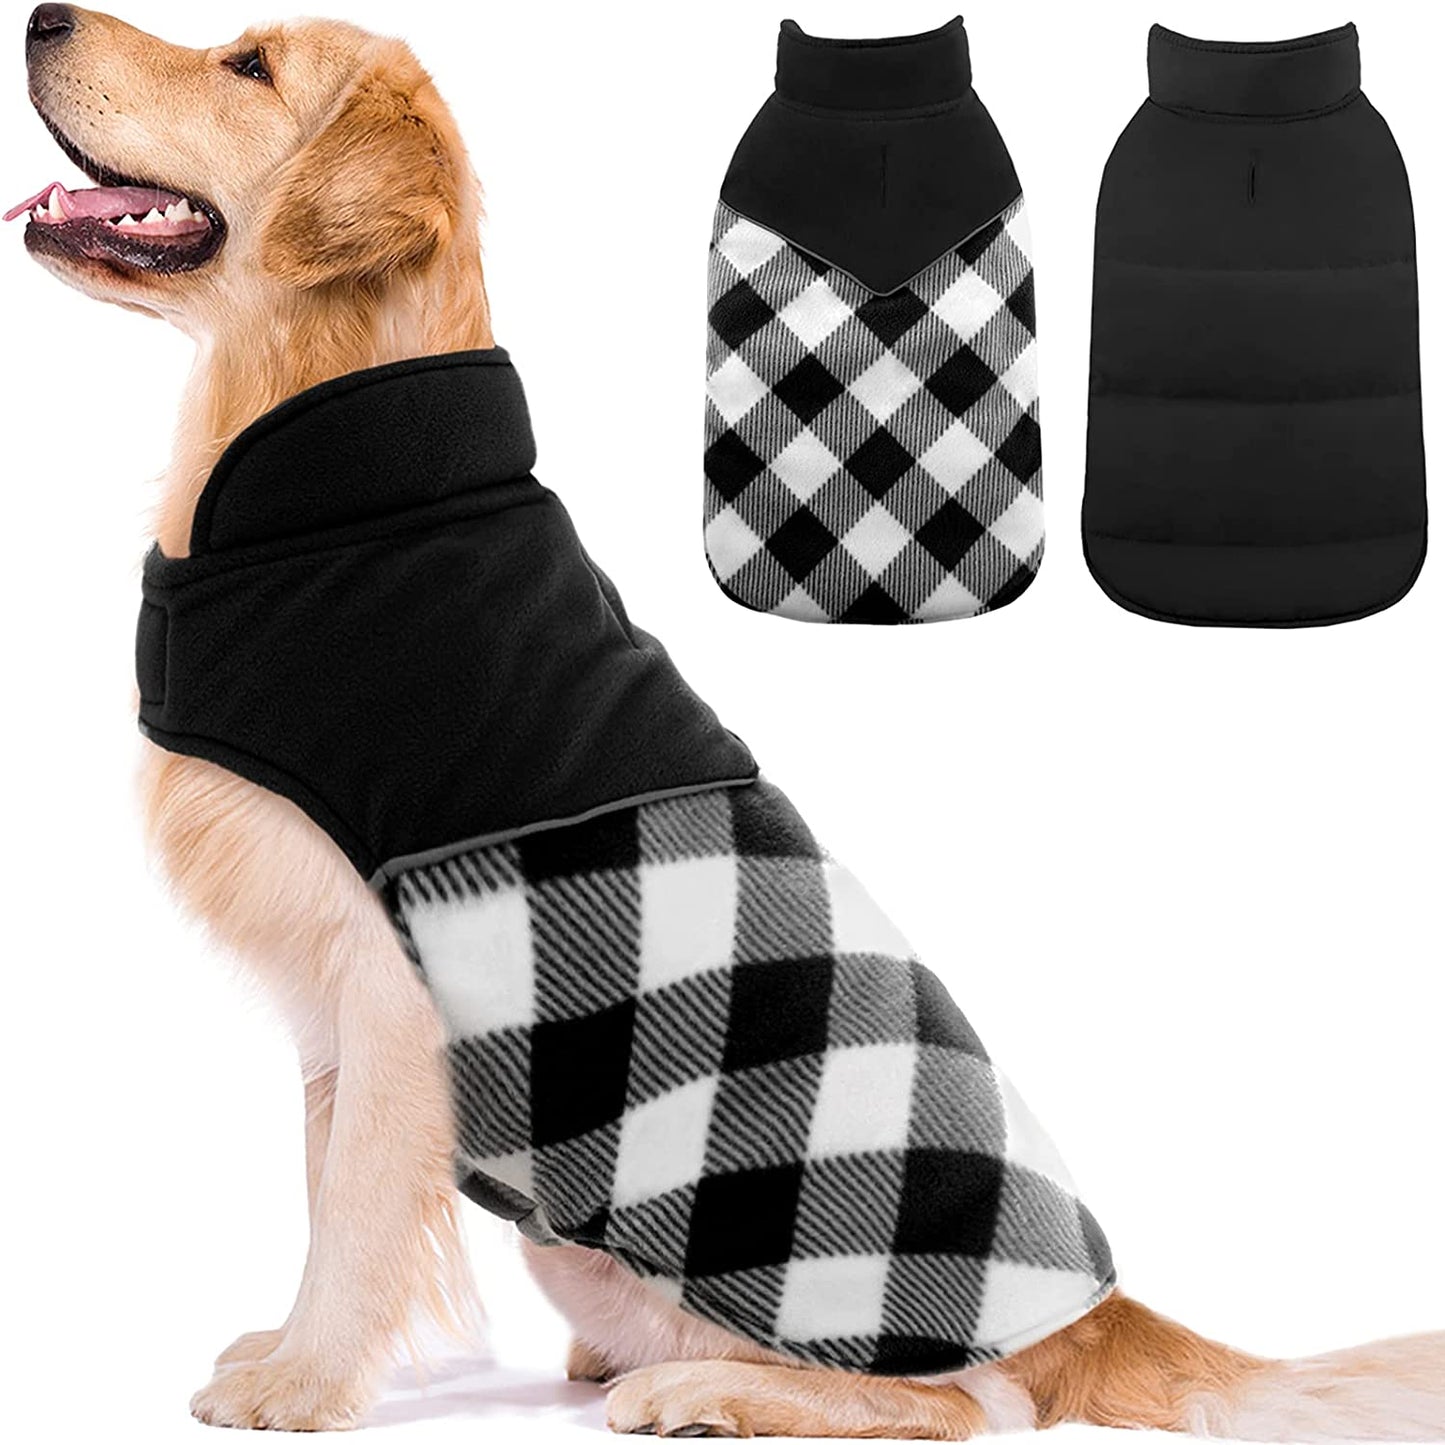 Kuoser Dog Winter Coat, Reversible Cold Weather Dog Jacket, Soft Warm Plaid Dog Coats, Puppy Waterproof Thickened Vest Windproof Outdoor Apparel for Small Medium and Large Dogs